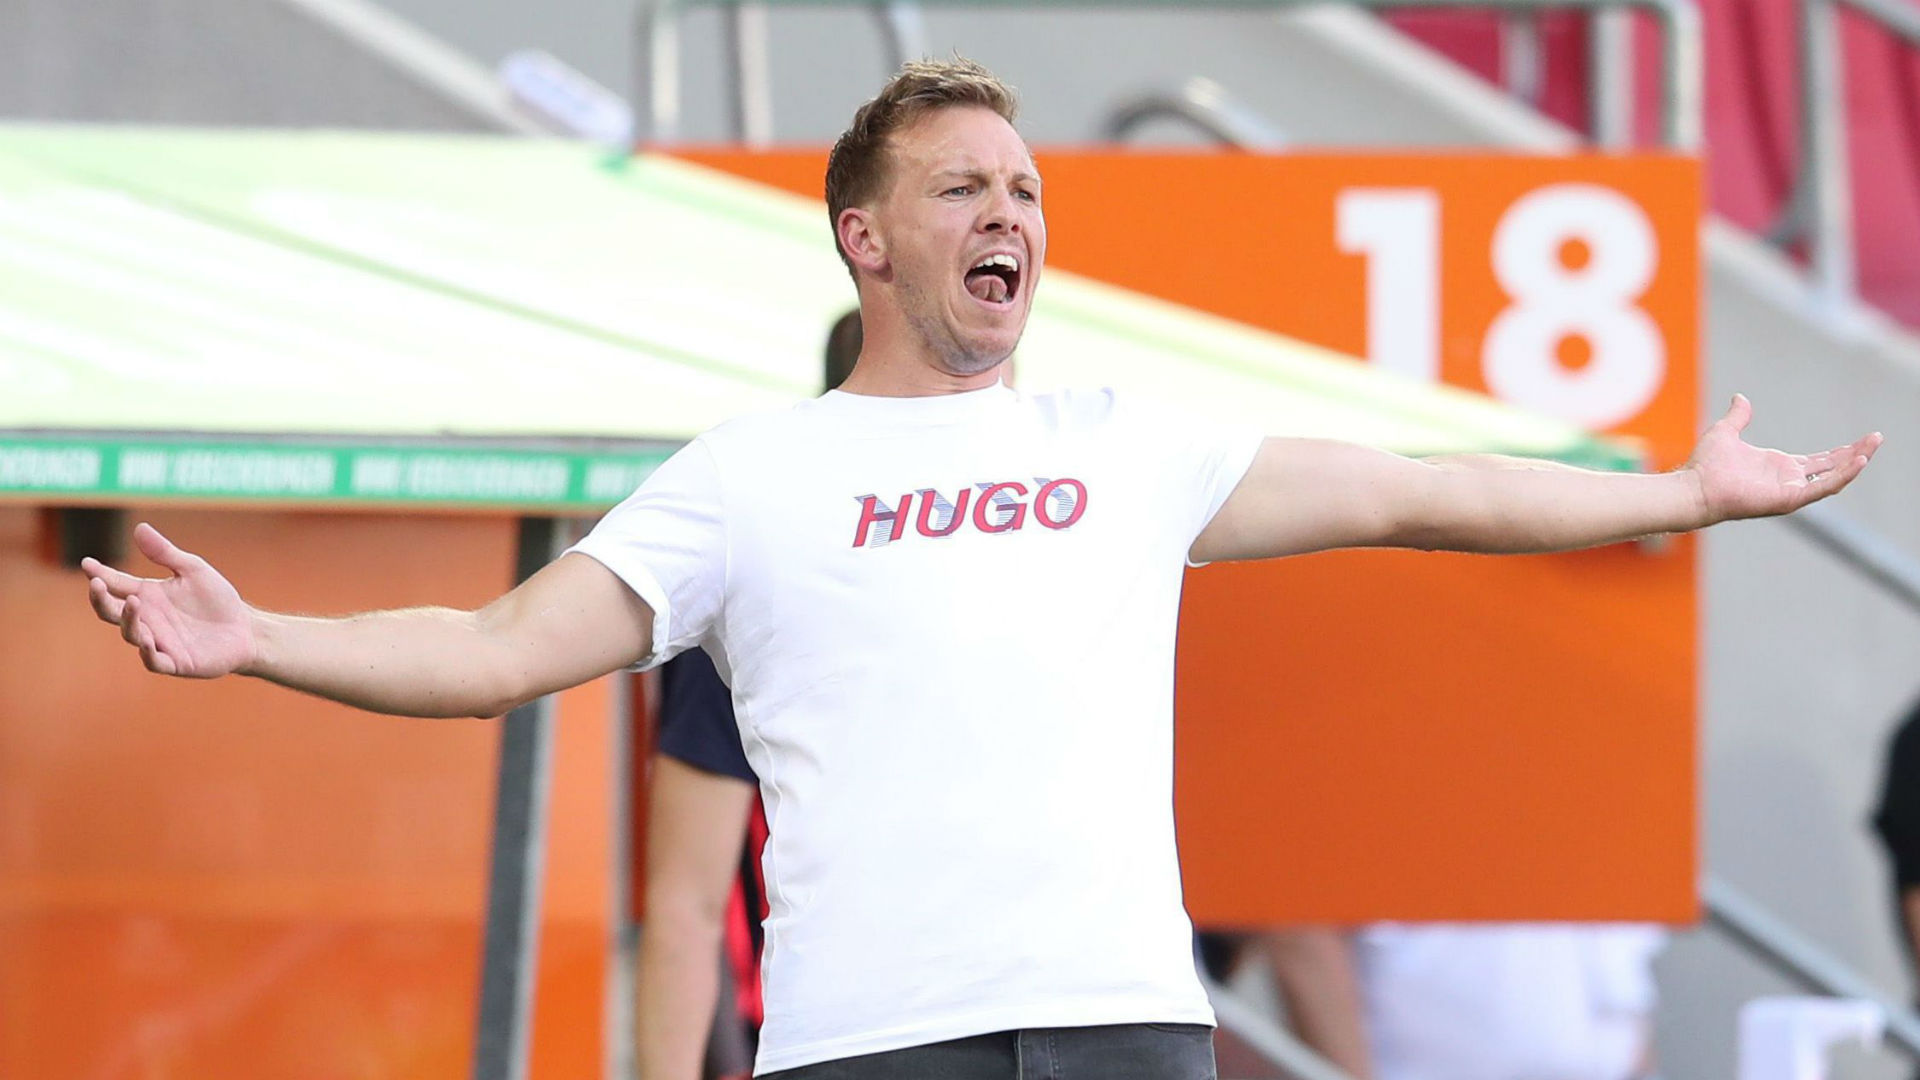 RB Leipzig coach Julian Nagelsmann has drawn comparisons to some of Europe's top coaches but wants to craft his own style.